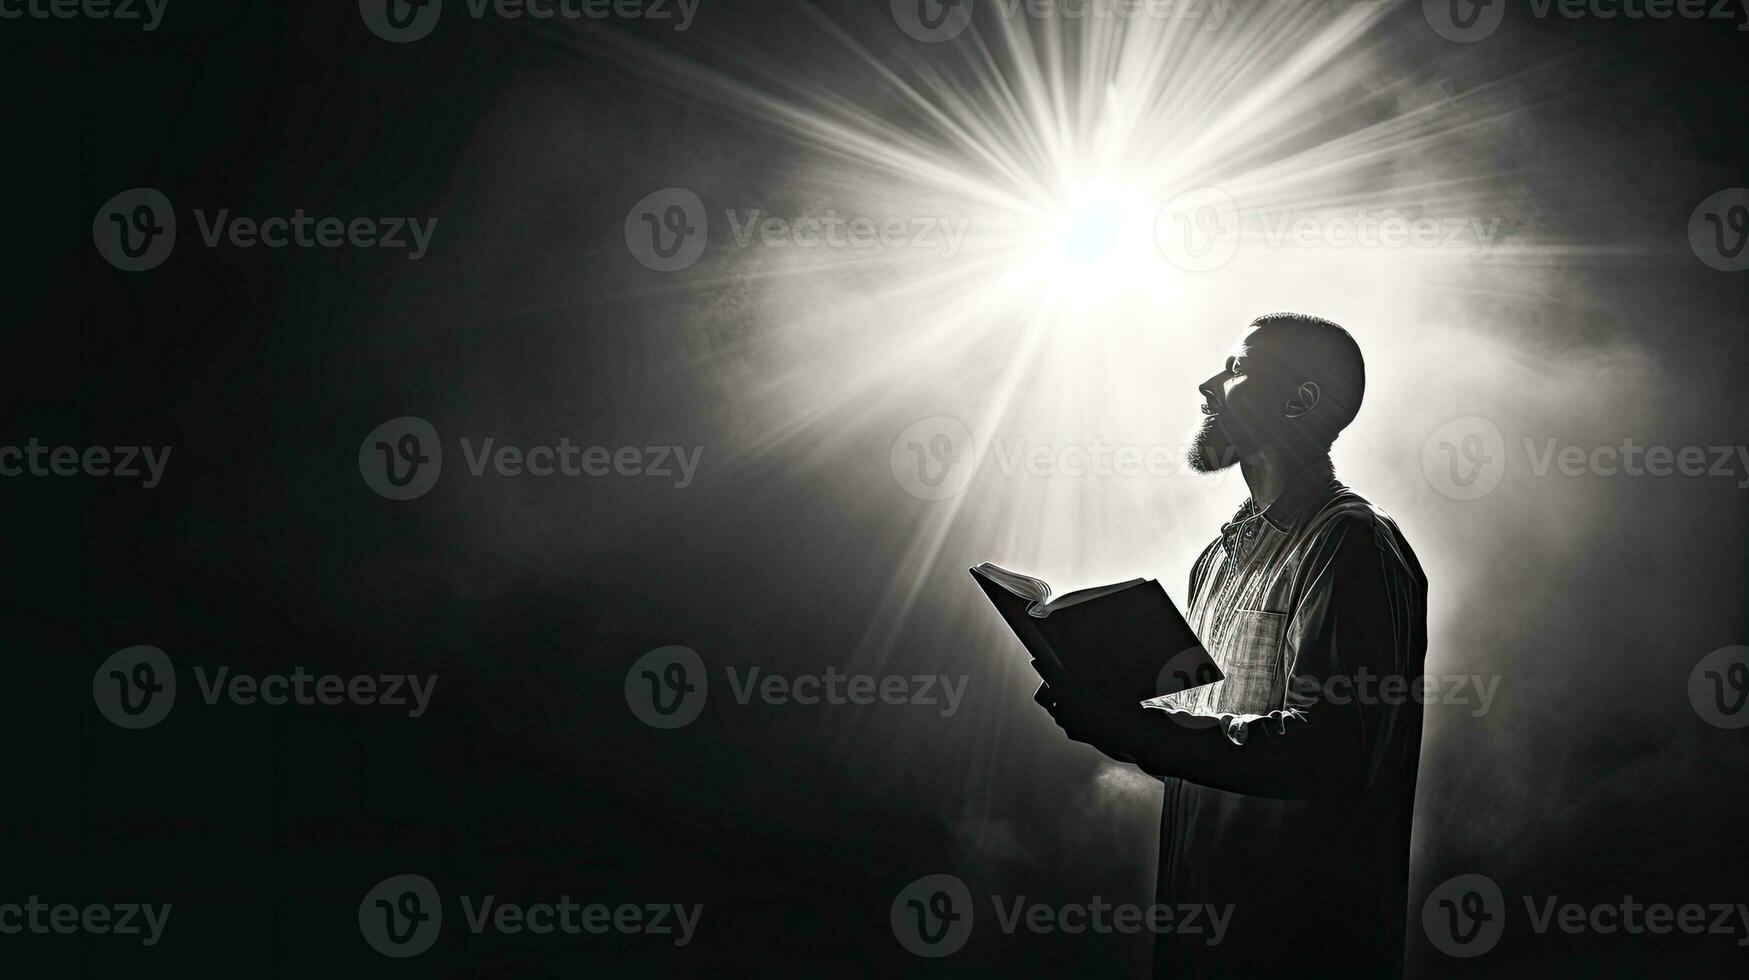 A man holds a Bible prays in black and white with a light flare photo